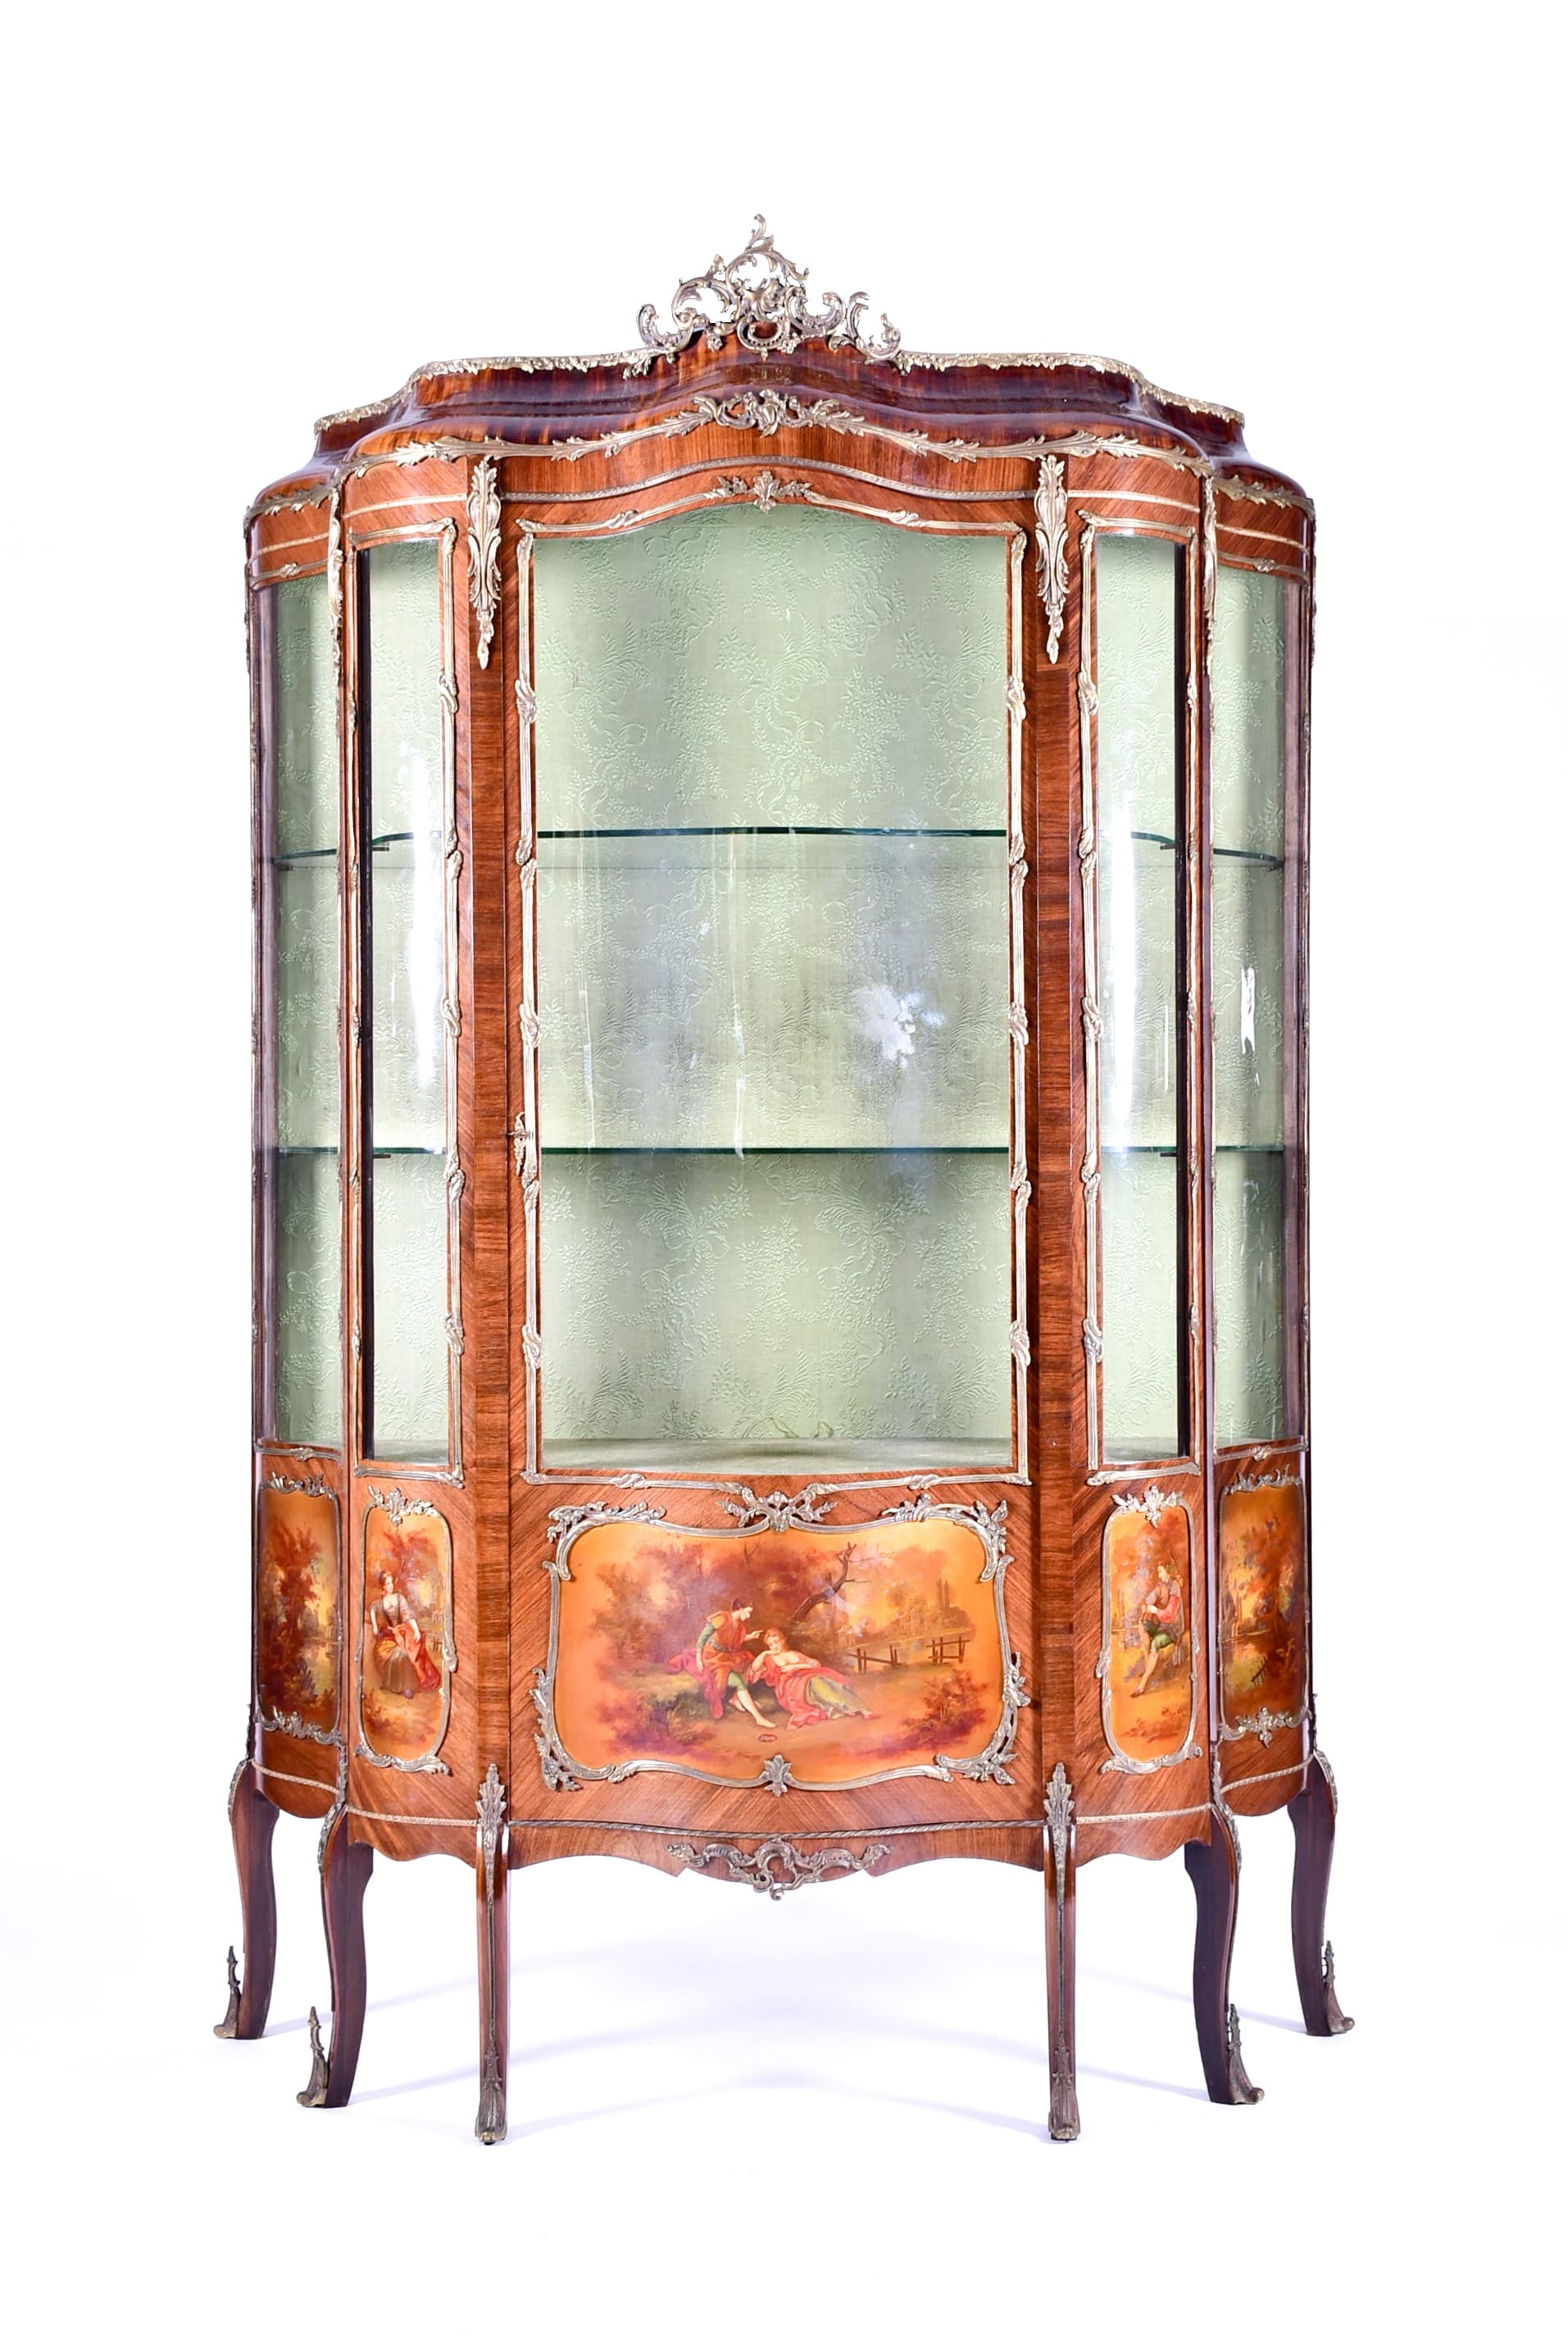 A large Louis XV style serpentine front kingwood vitrine cabinet